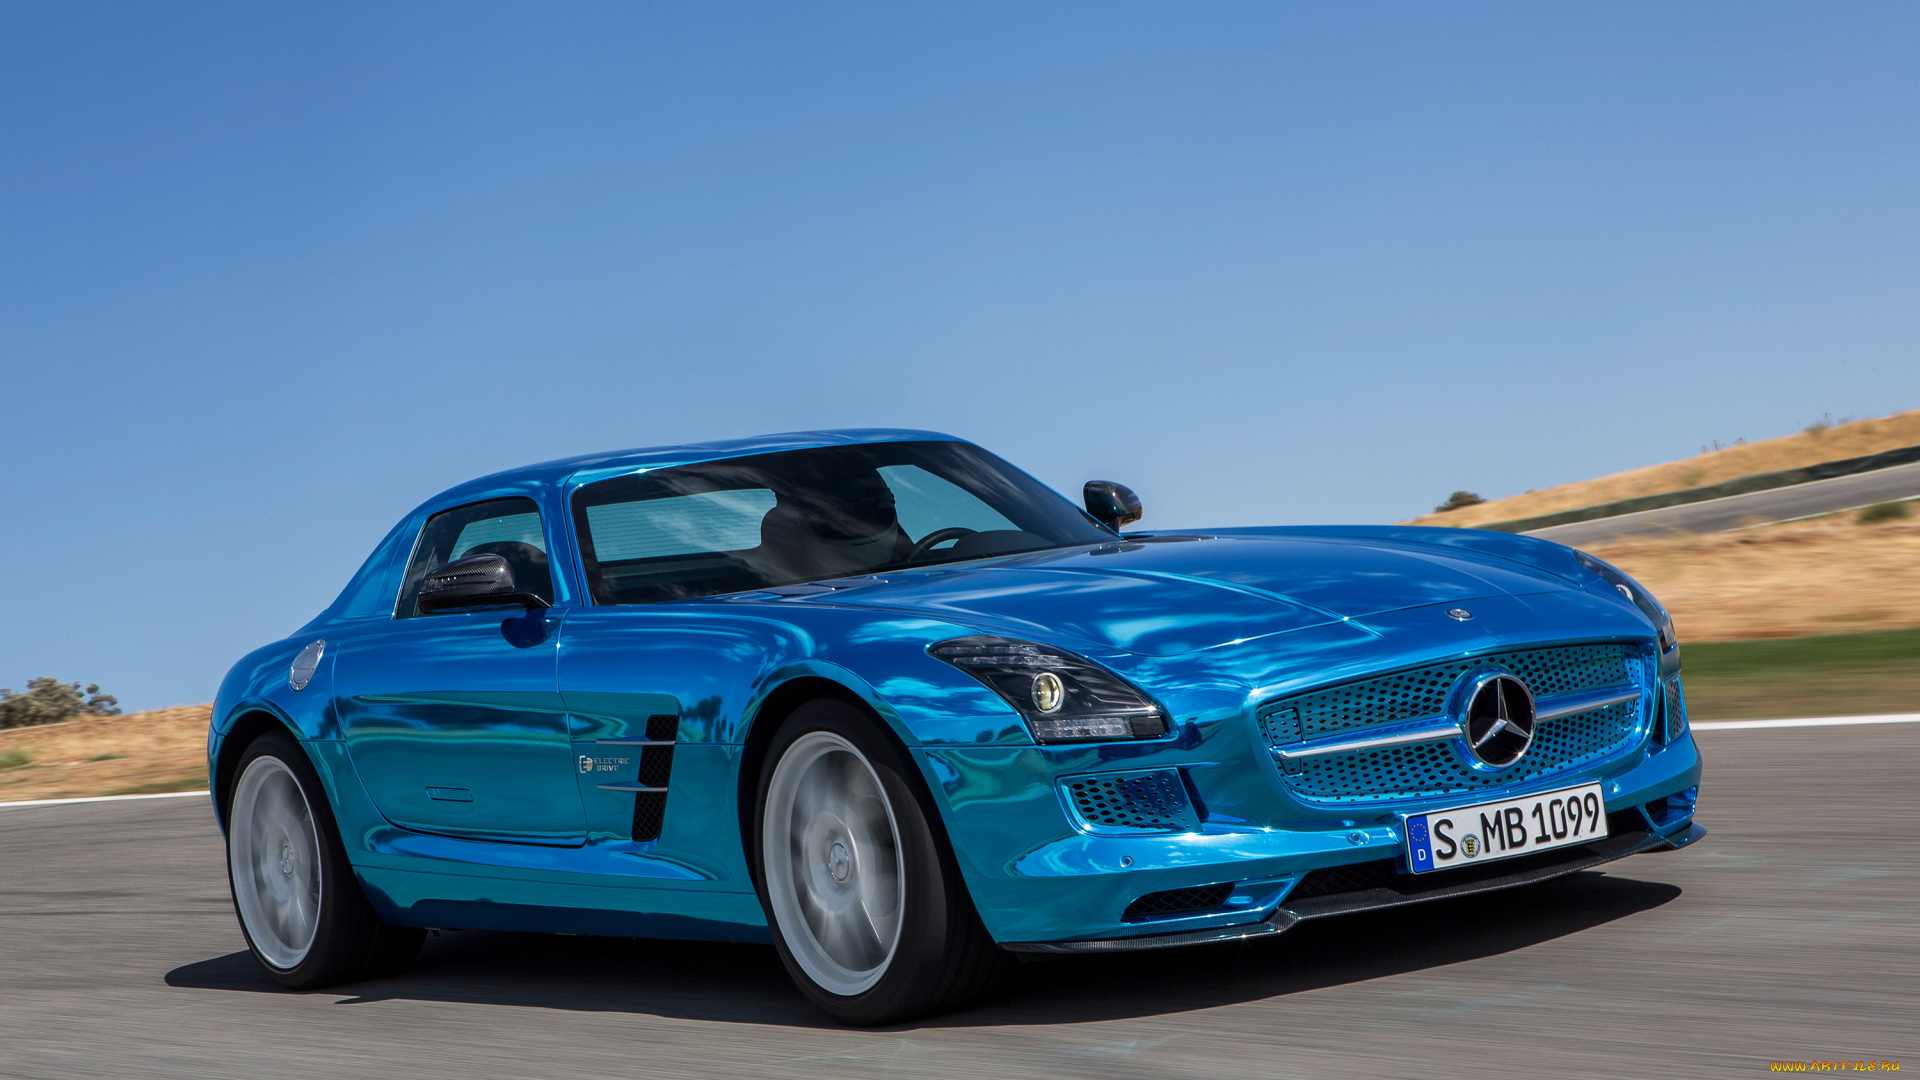 mercedes-benz, sls, amg, coupe, electric, drive, 2014, автомобили, mercedes-benz, amg, sls, 2014, drive, coupe, electric